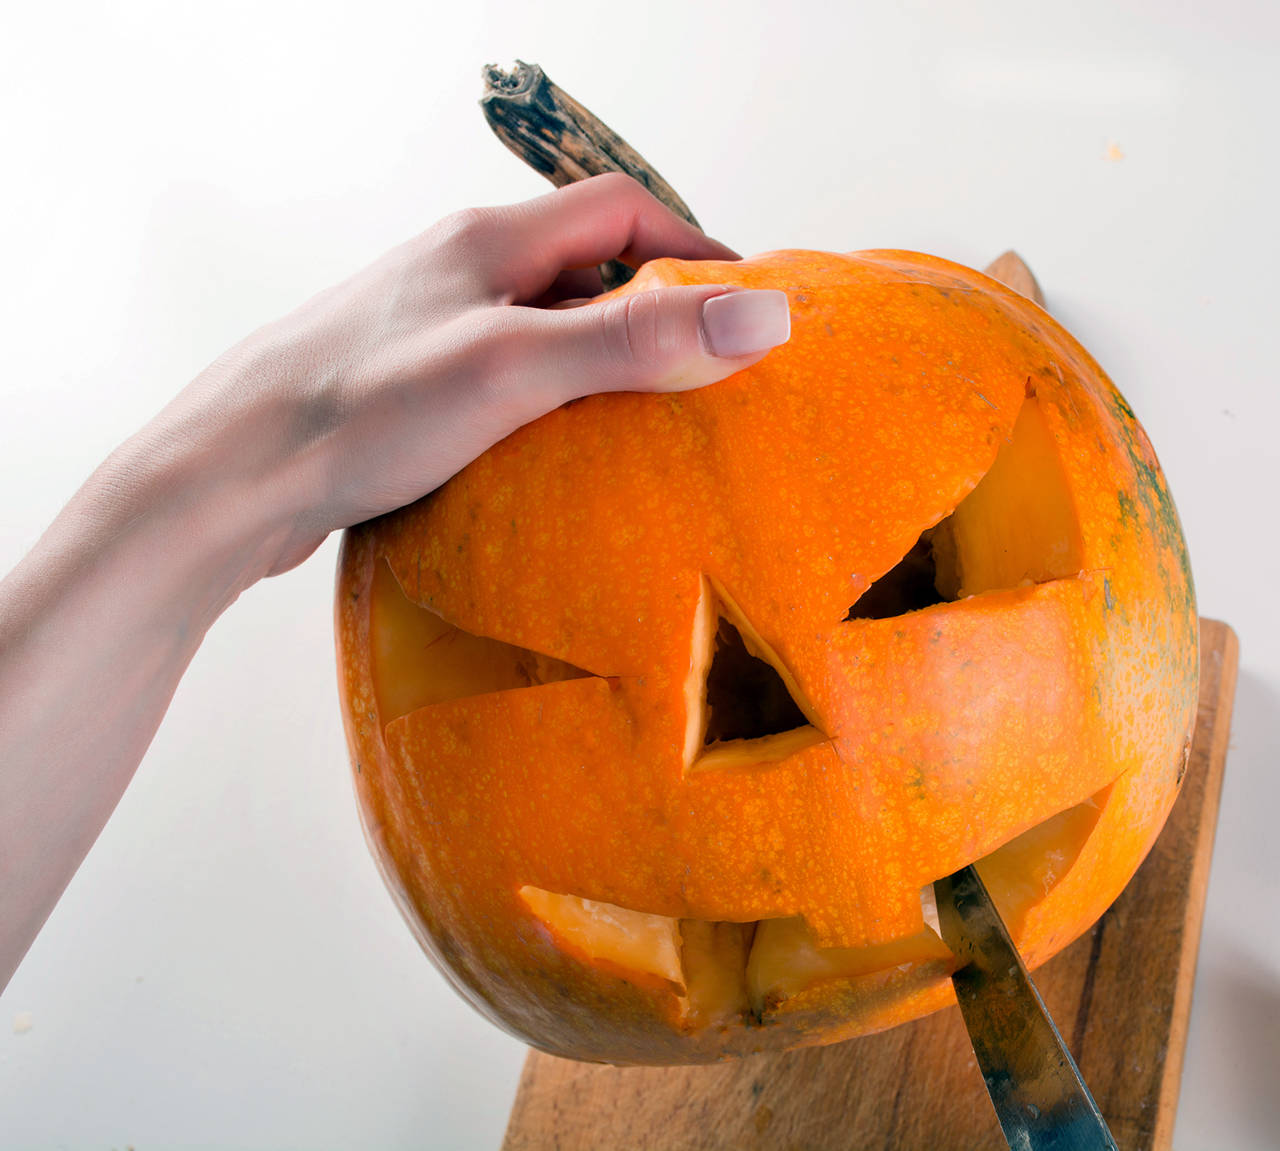 It’s a spooky time of year; no need to make it scarier with a hand injury. (Dreamstime)